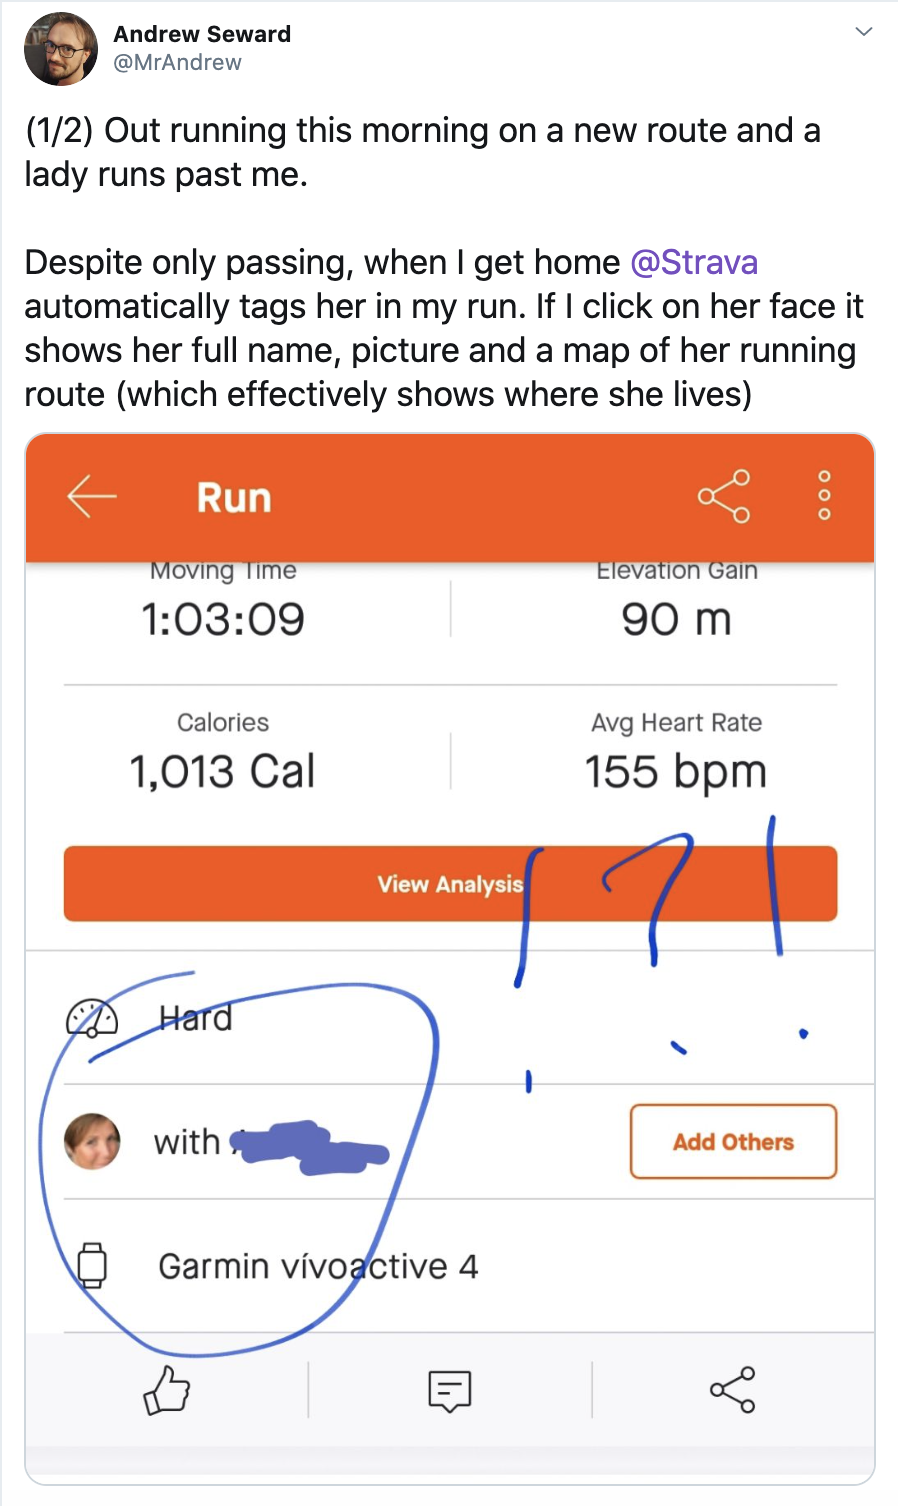 Seward noticed his Strava app disclosed information on nearby runners